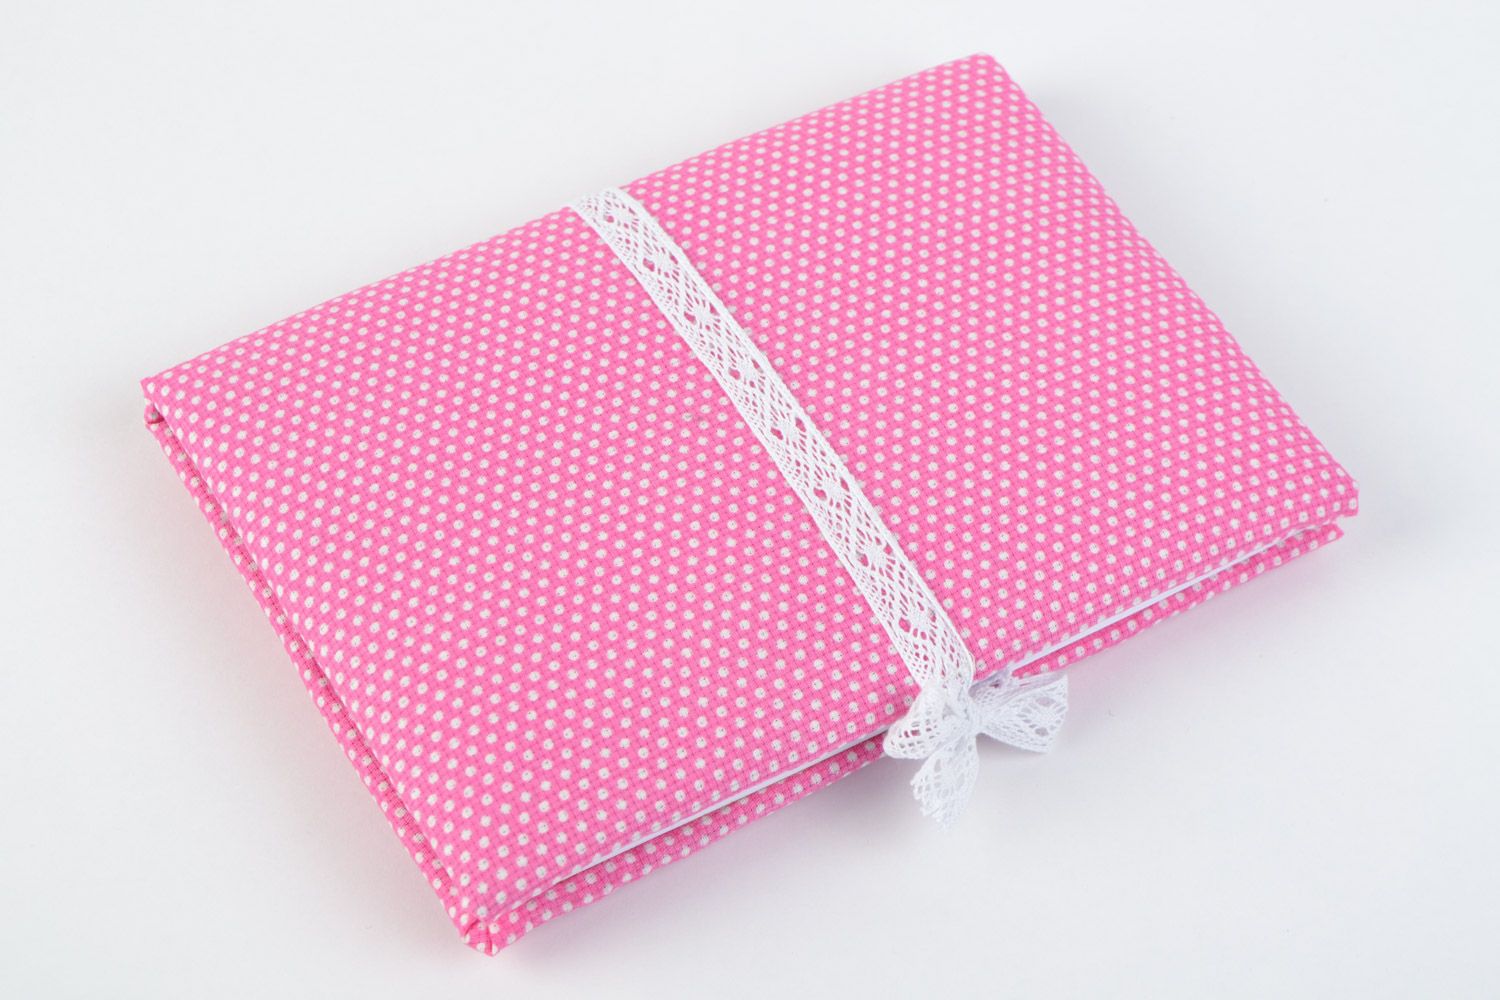 Handmade notebook with bright pink and white polka dot cotton cover for 60 pages photo 1